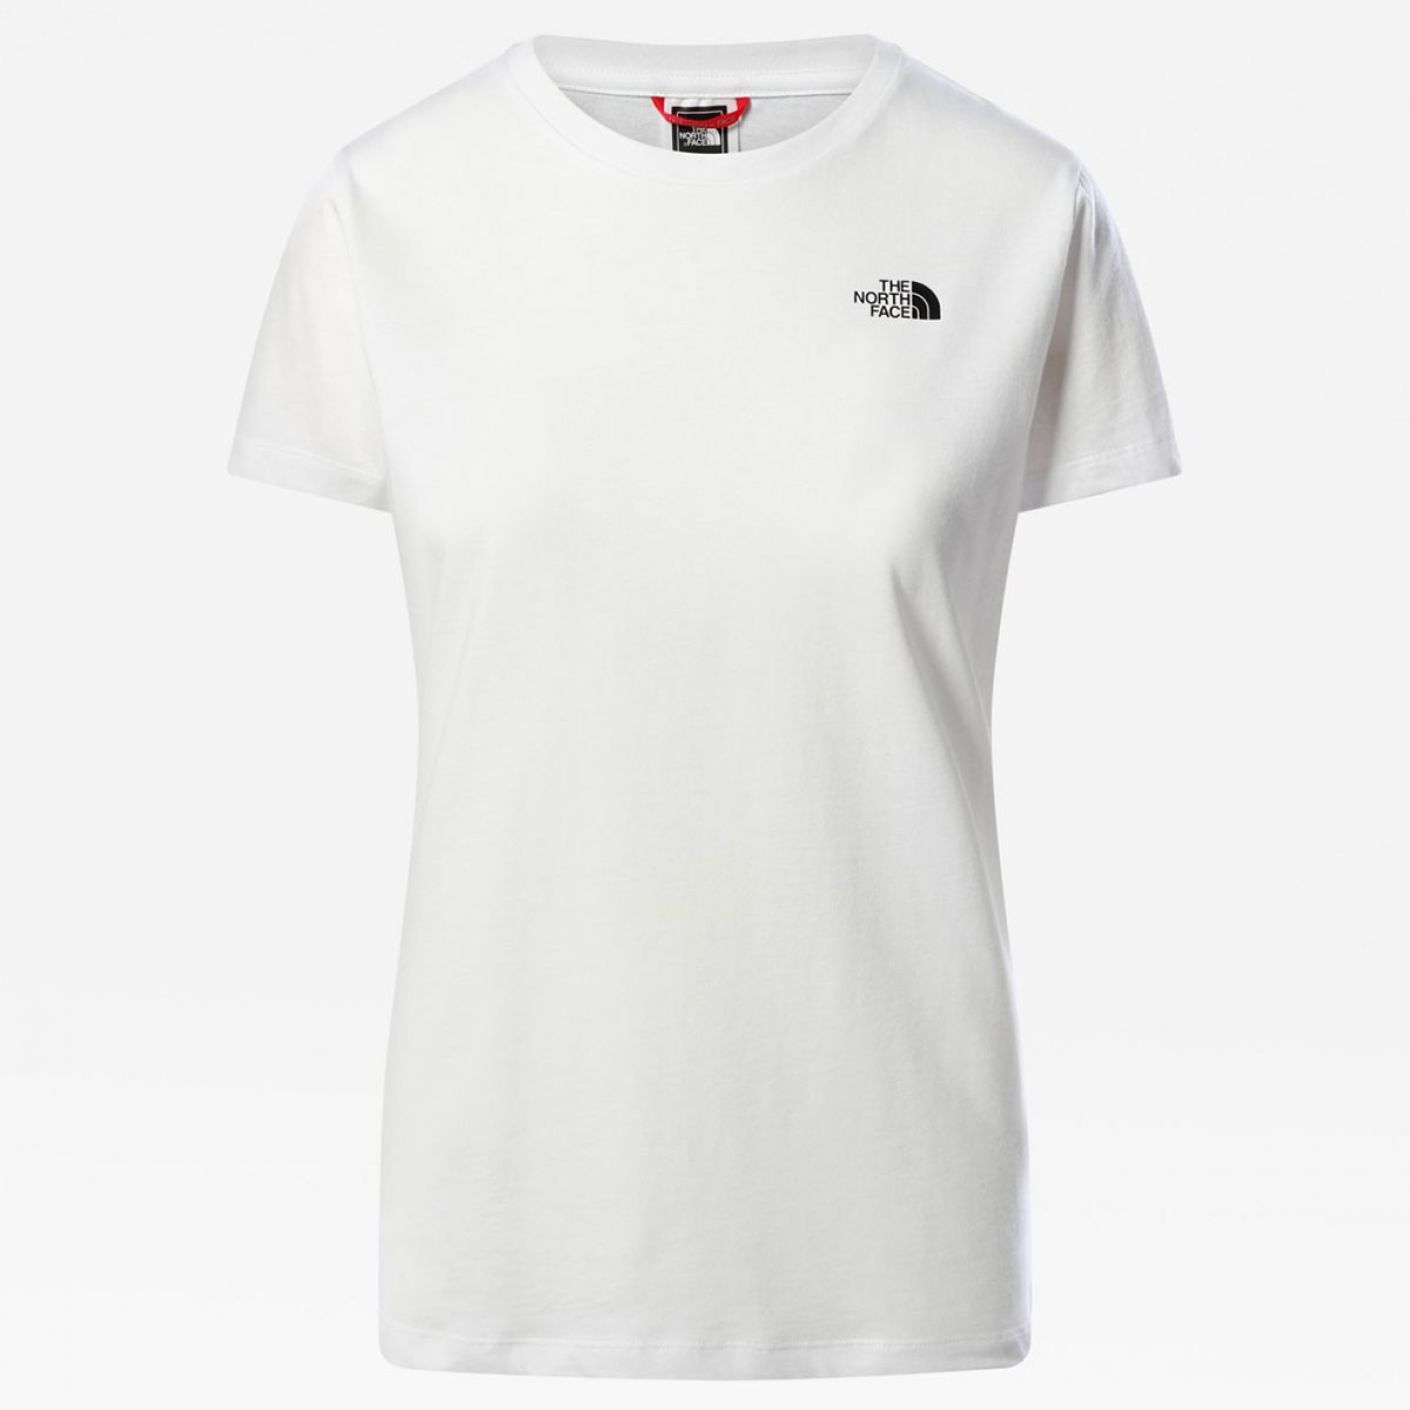 The North Face Simple Dome White T-shirt